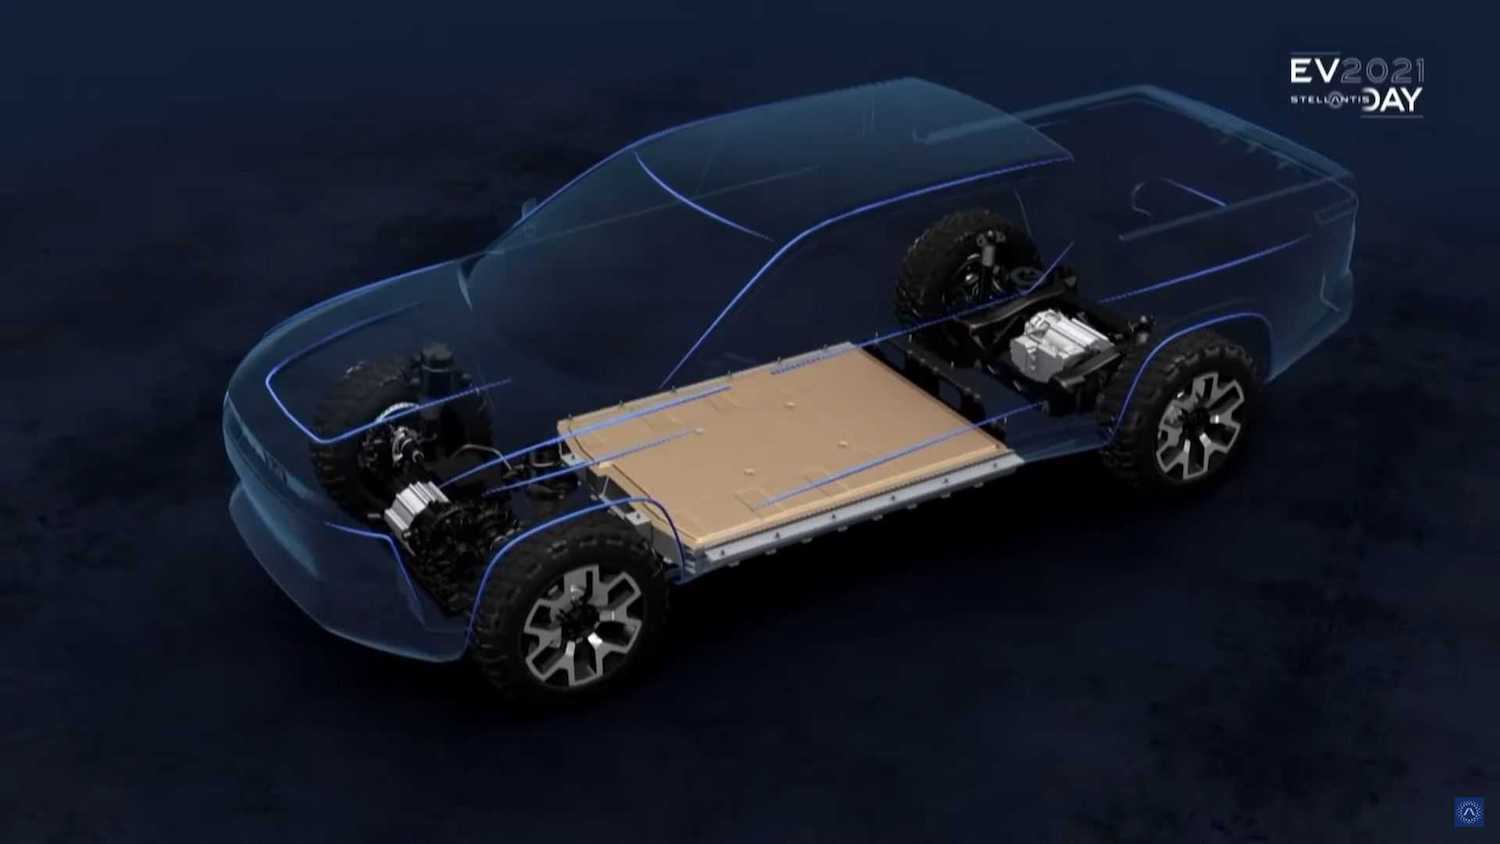 Cutaway of the 2024 Ram 1500 electric pickup truck showing its chassis and possible range extender motor.